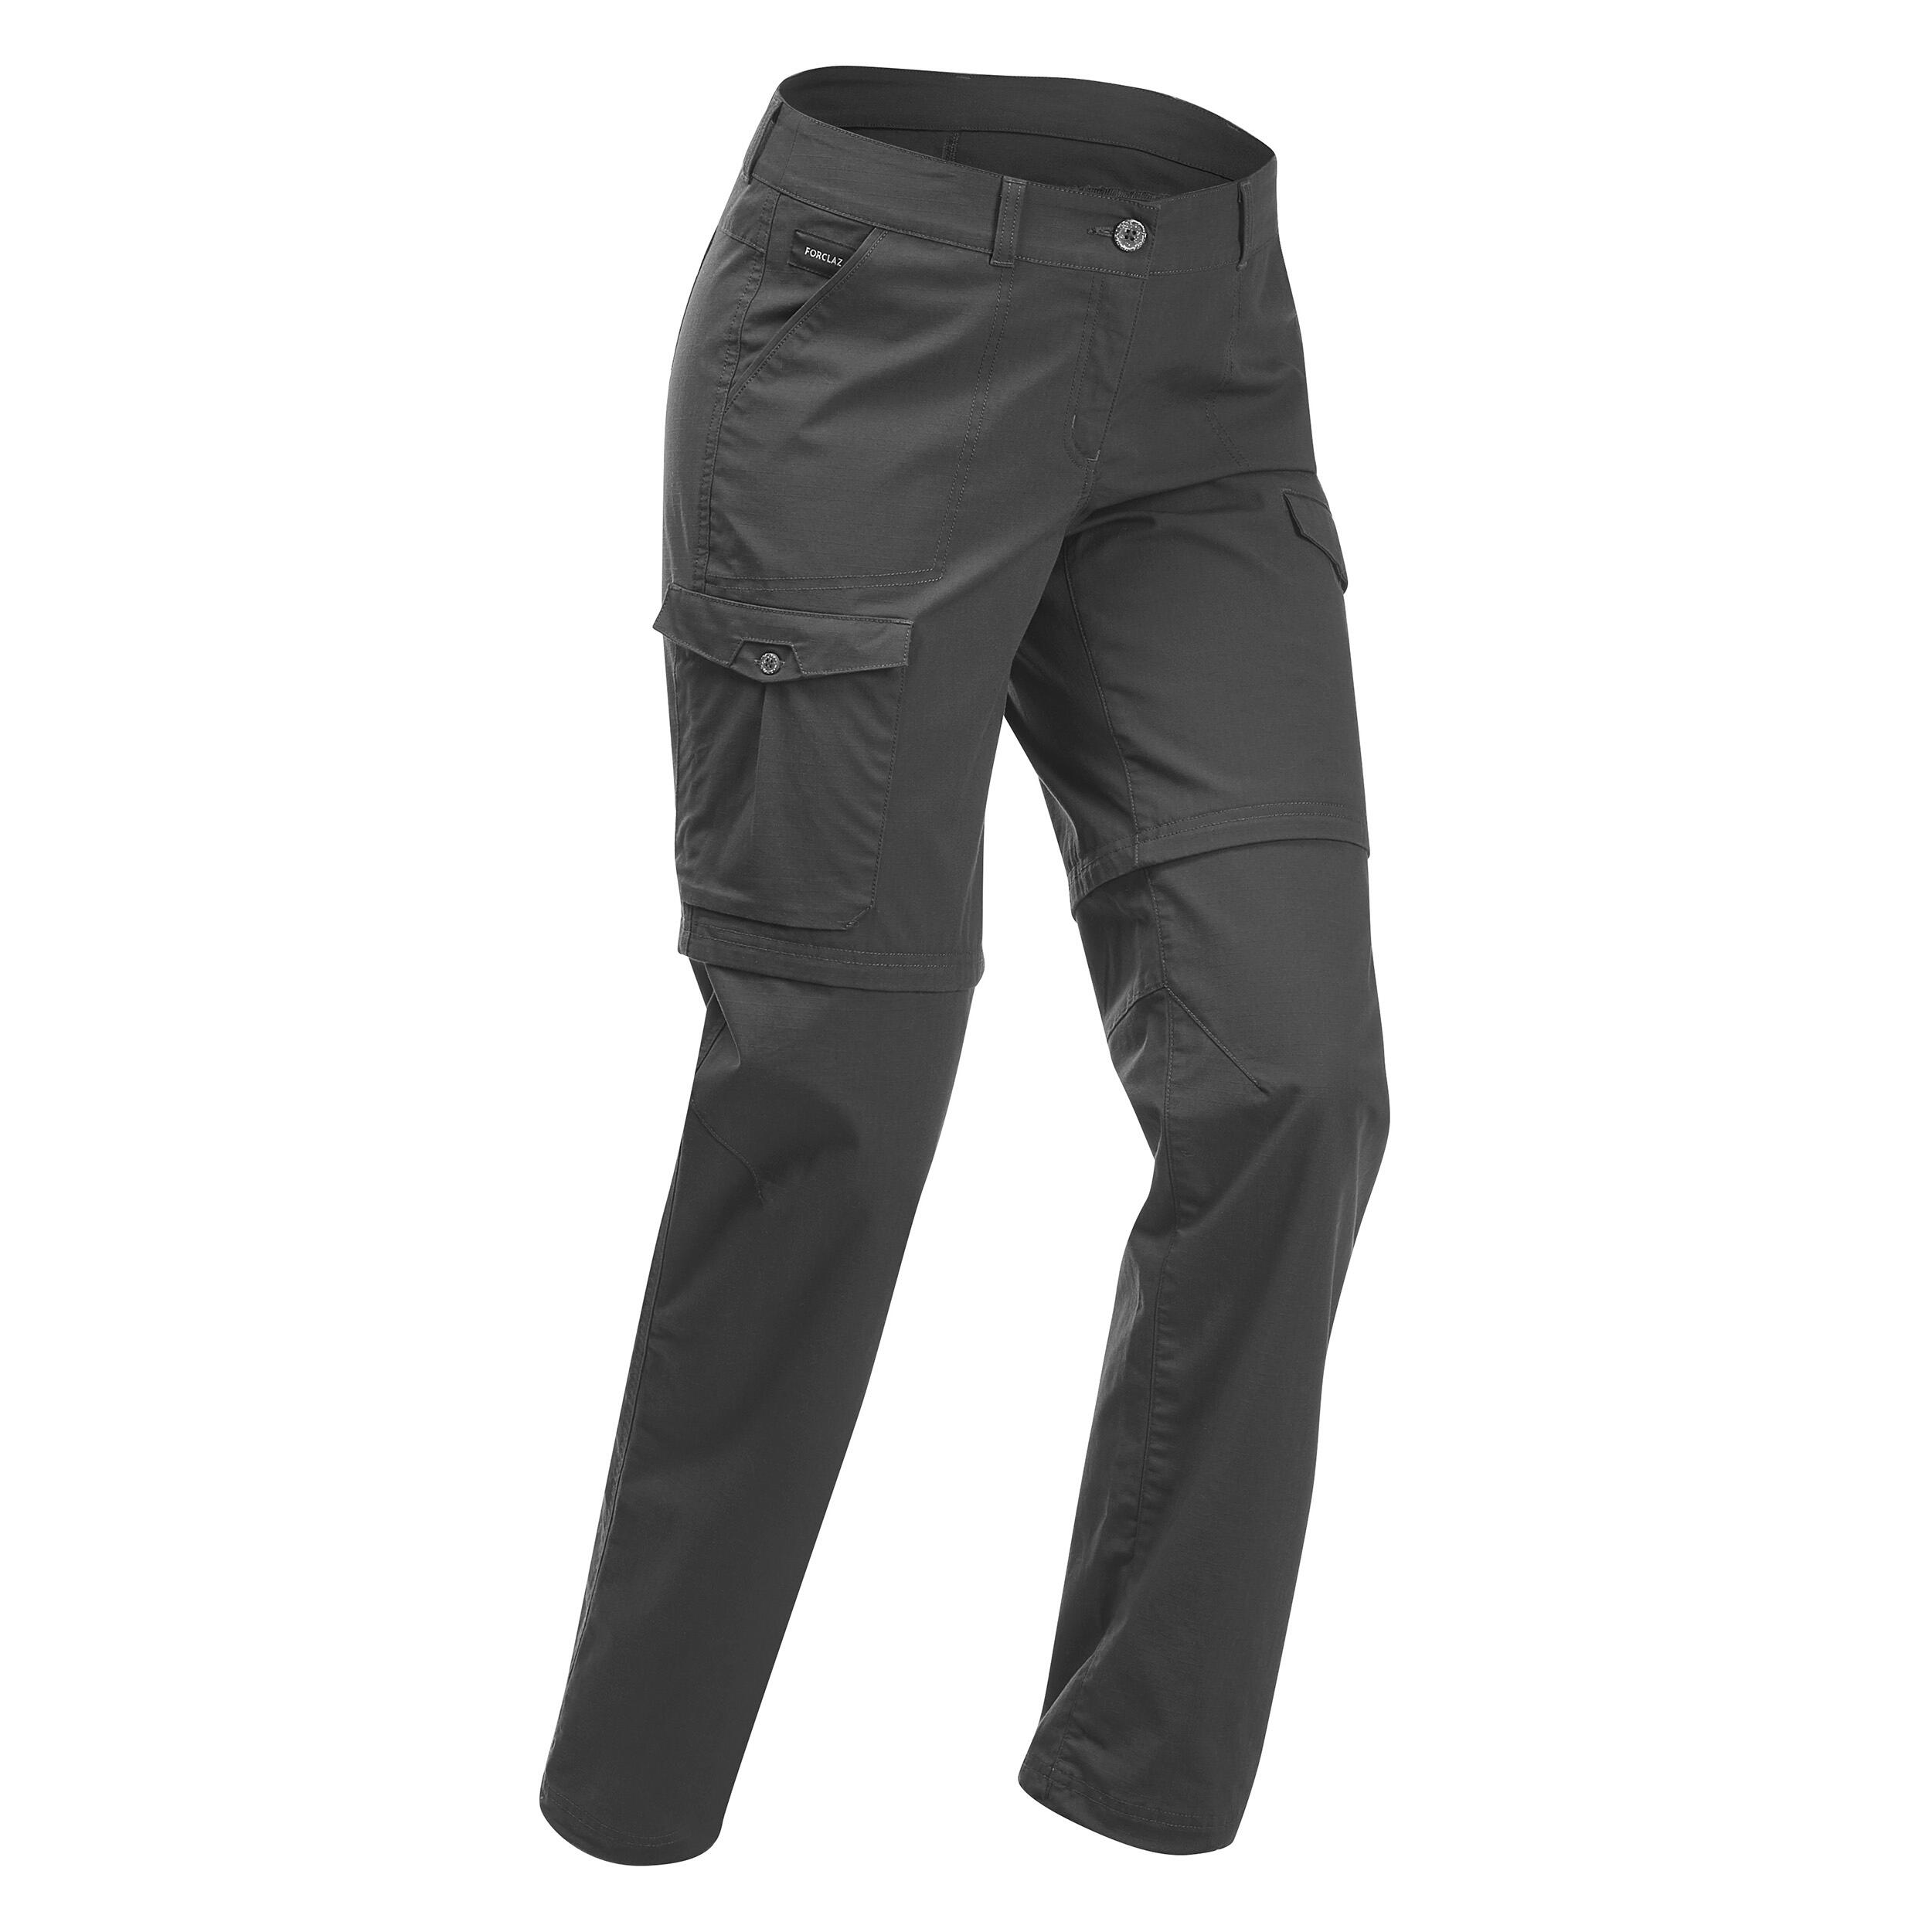 Nyamba By Decathlon Track Pants Price in India | Track Pants Price List in  India - DTashion.com